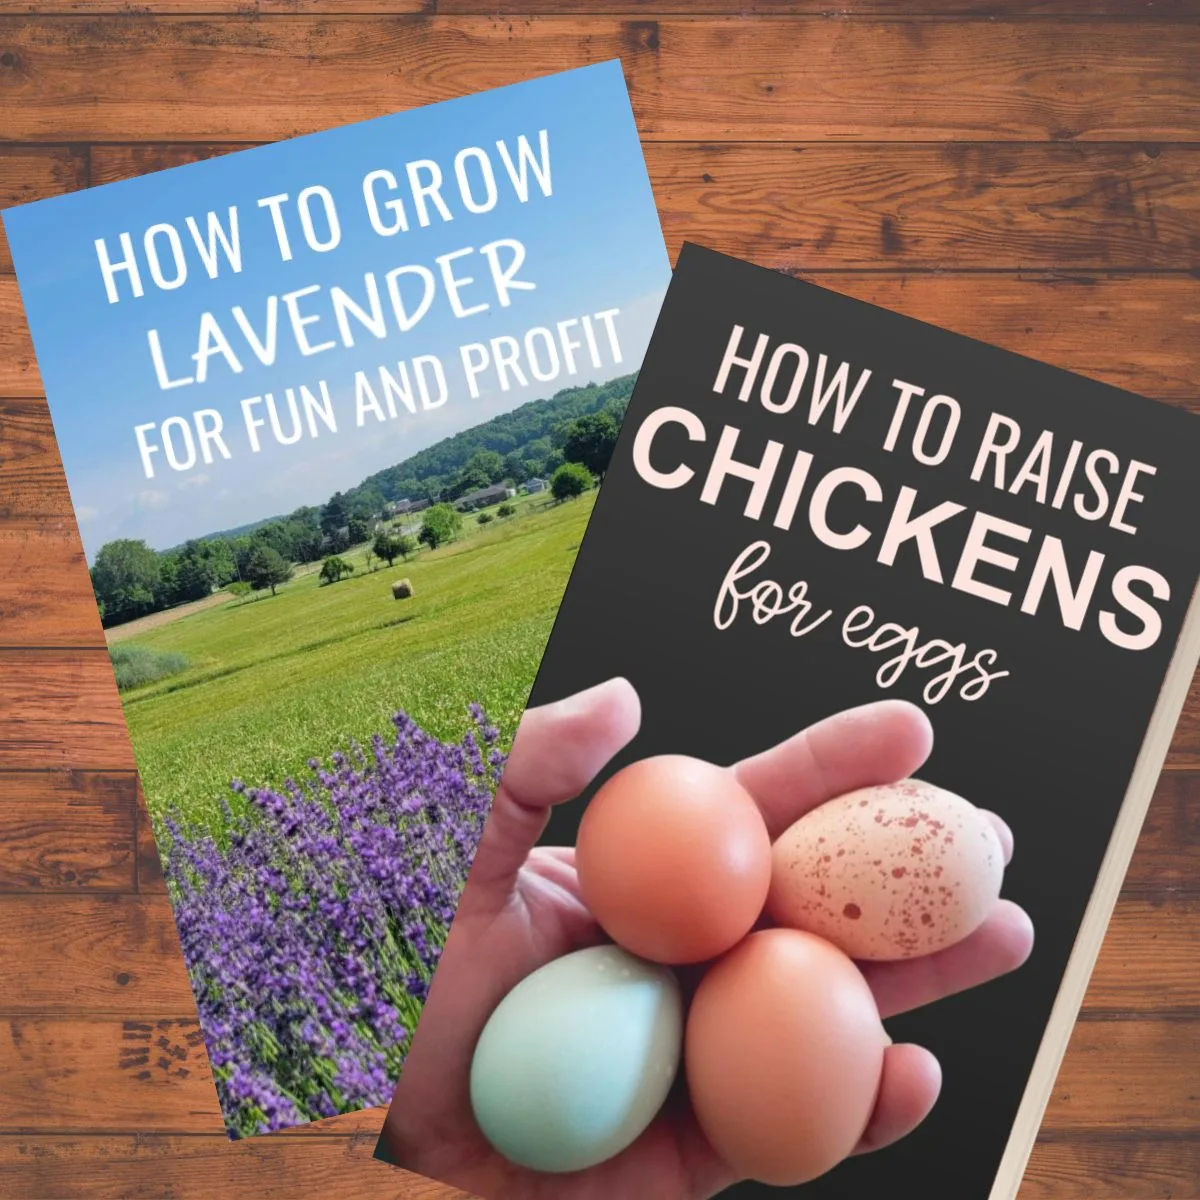 A book about planting lavender and book about raising chickens. 